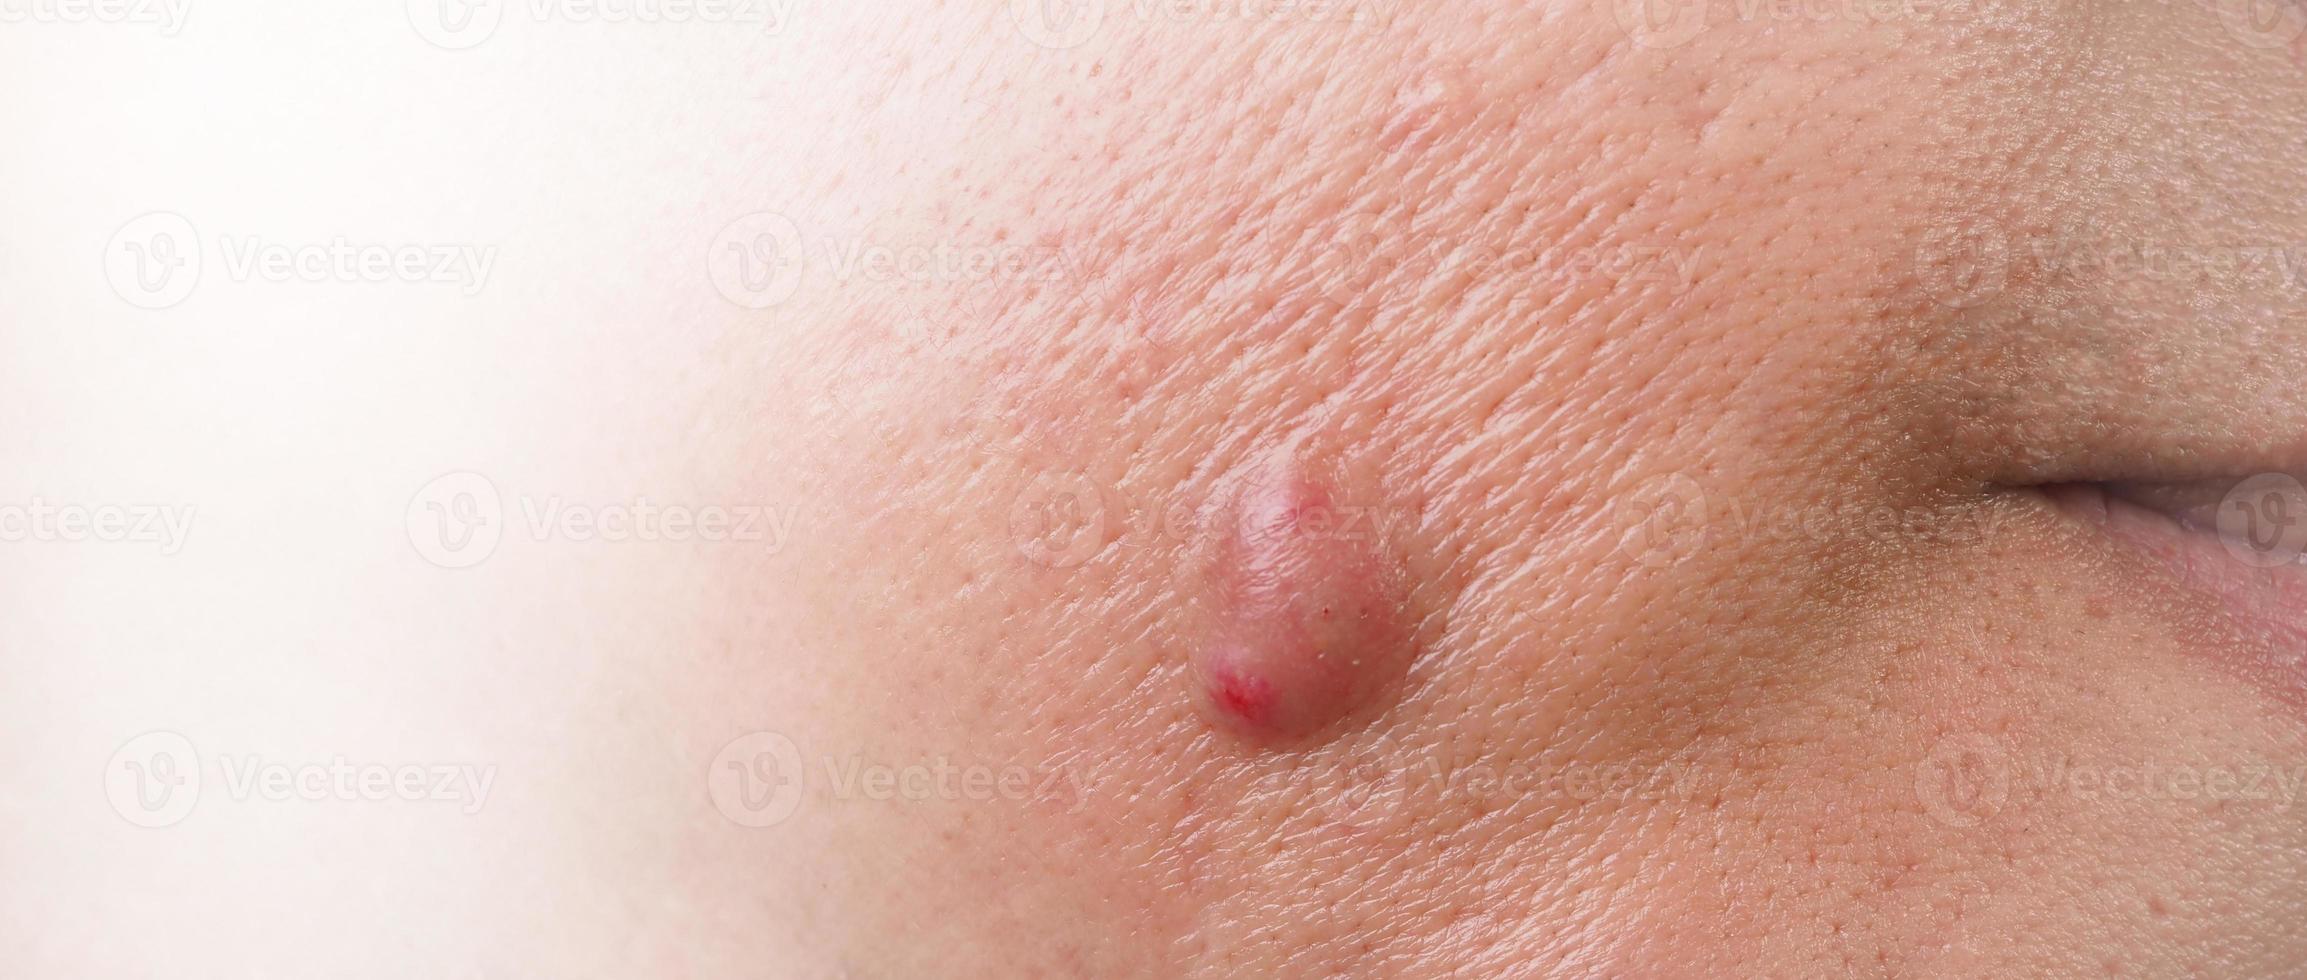 Bacterial skin infection. Big Acne Cyst Abscess or Ulcer Swollen area within face skin tissue. Containing accumulation of pus and blood. Macro shot of Acne or Dermatitis near mouth on face. Skincare. photo